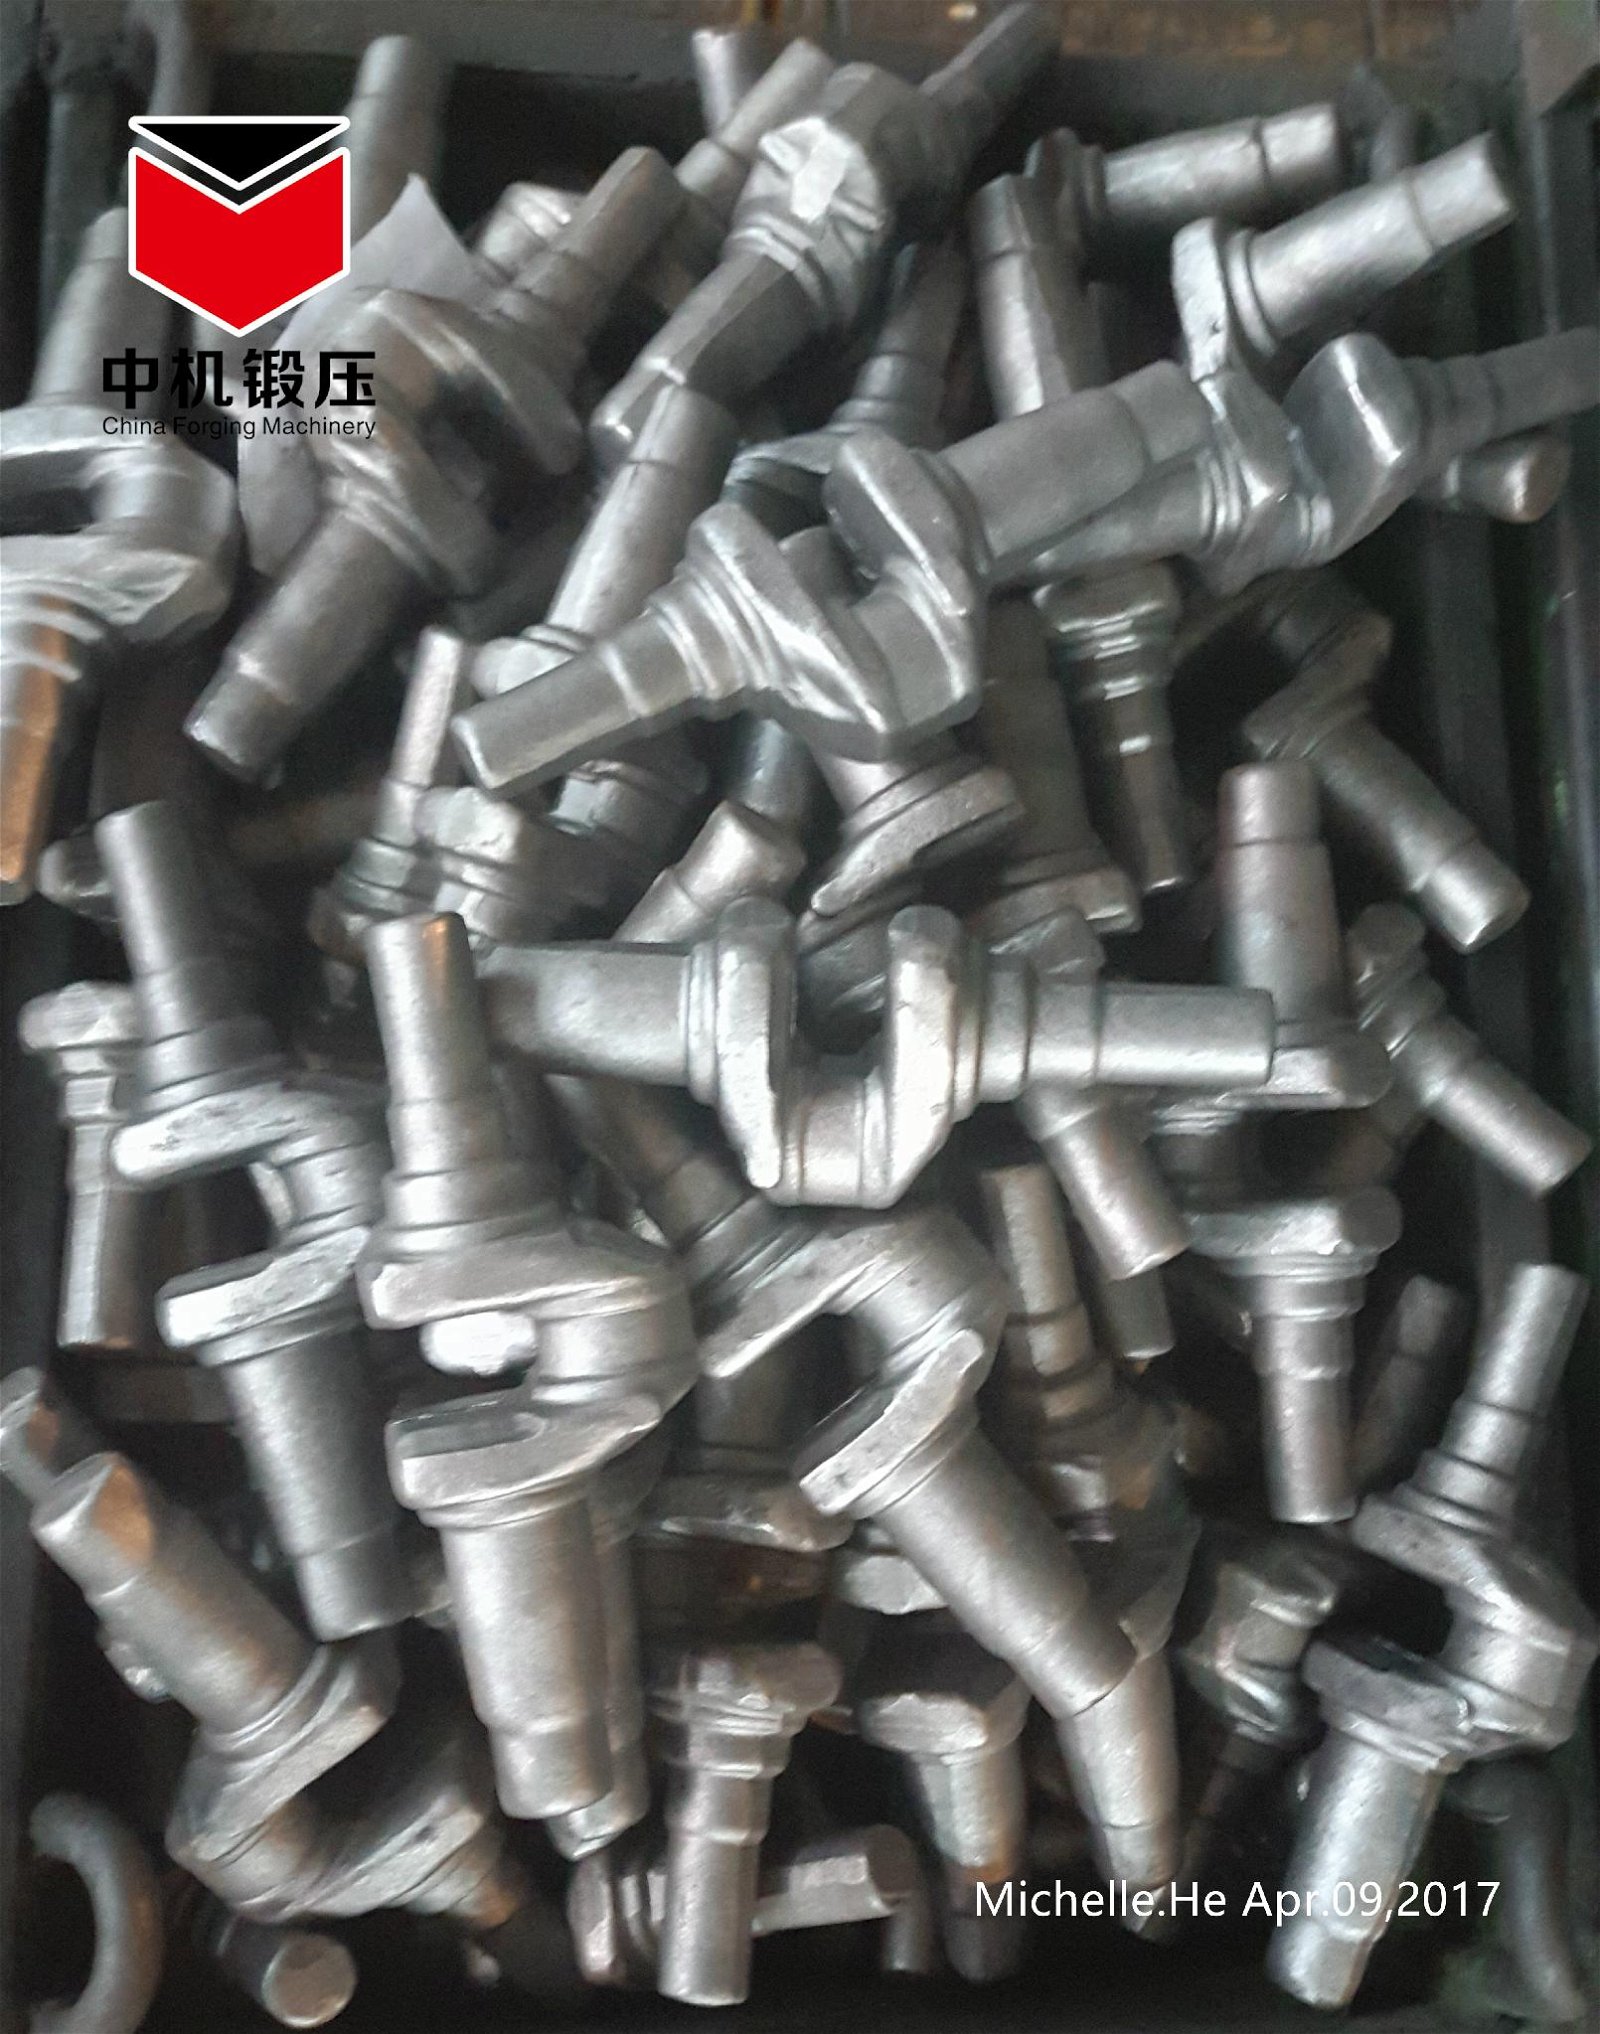 Chinese Hydraulic Drop Forging Hammer 2Tons in Taiwan 5